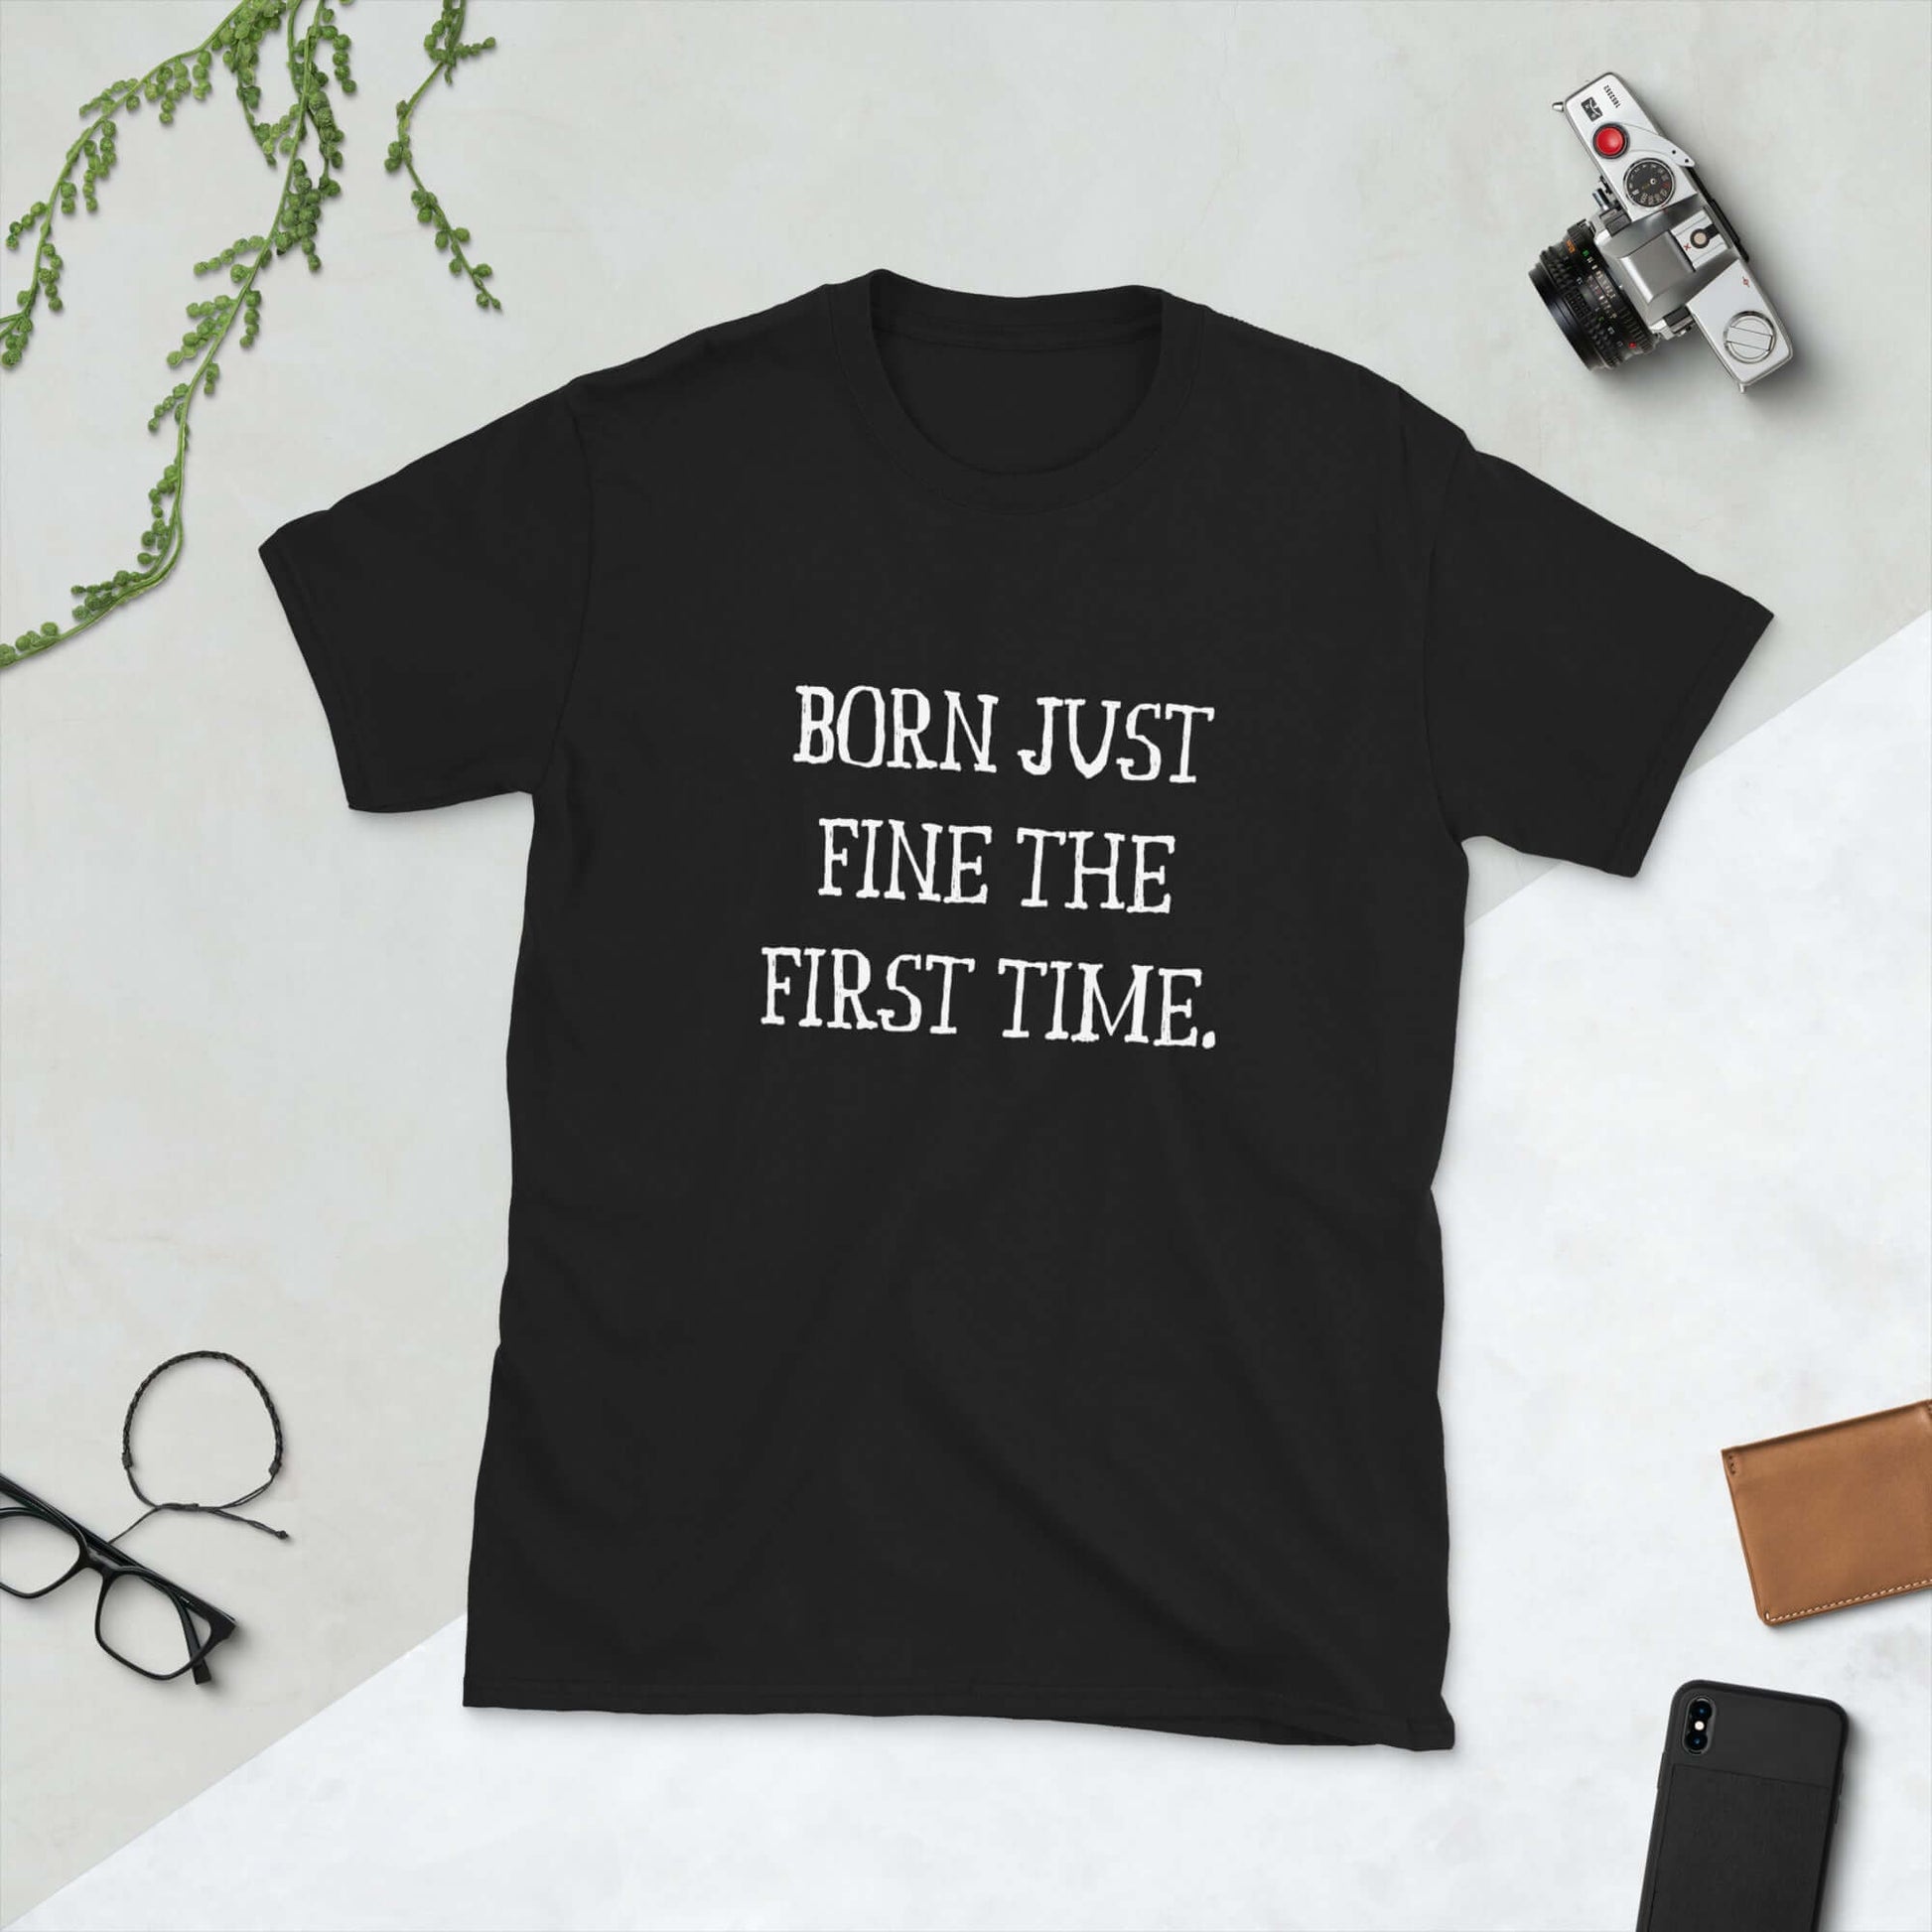 Black t-shirt with the words Born just fine the first time printed on the front.